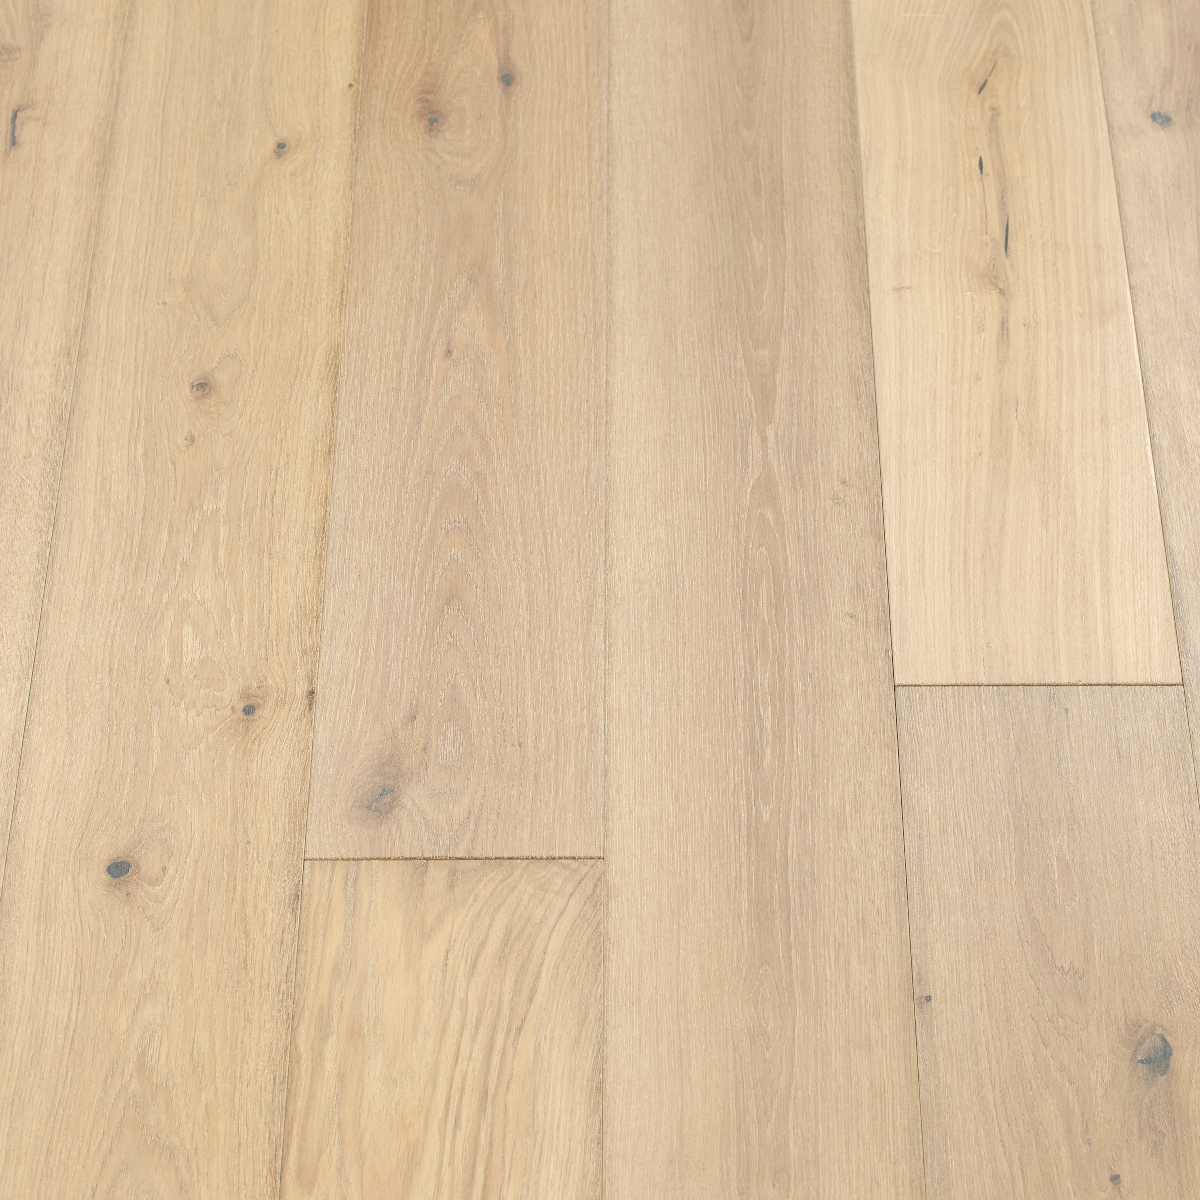 Classic Linen Wood Flooring - image featuring a linen-coloured wood flooring with a smooth surface, creating a timeless and sophisticated ambiance.